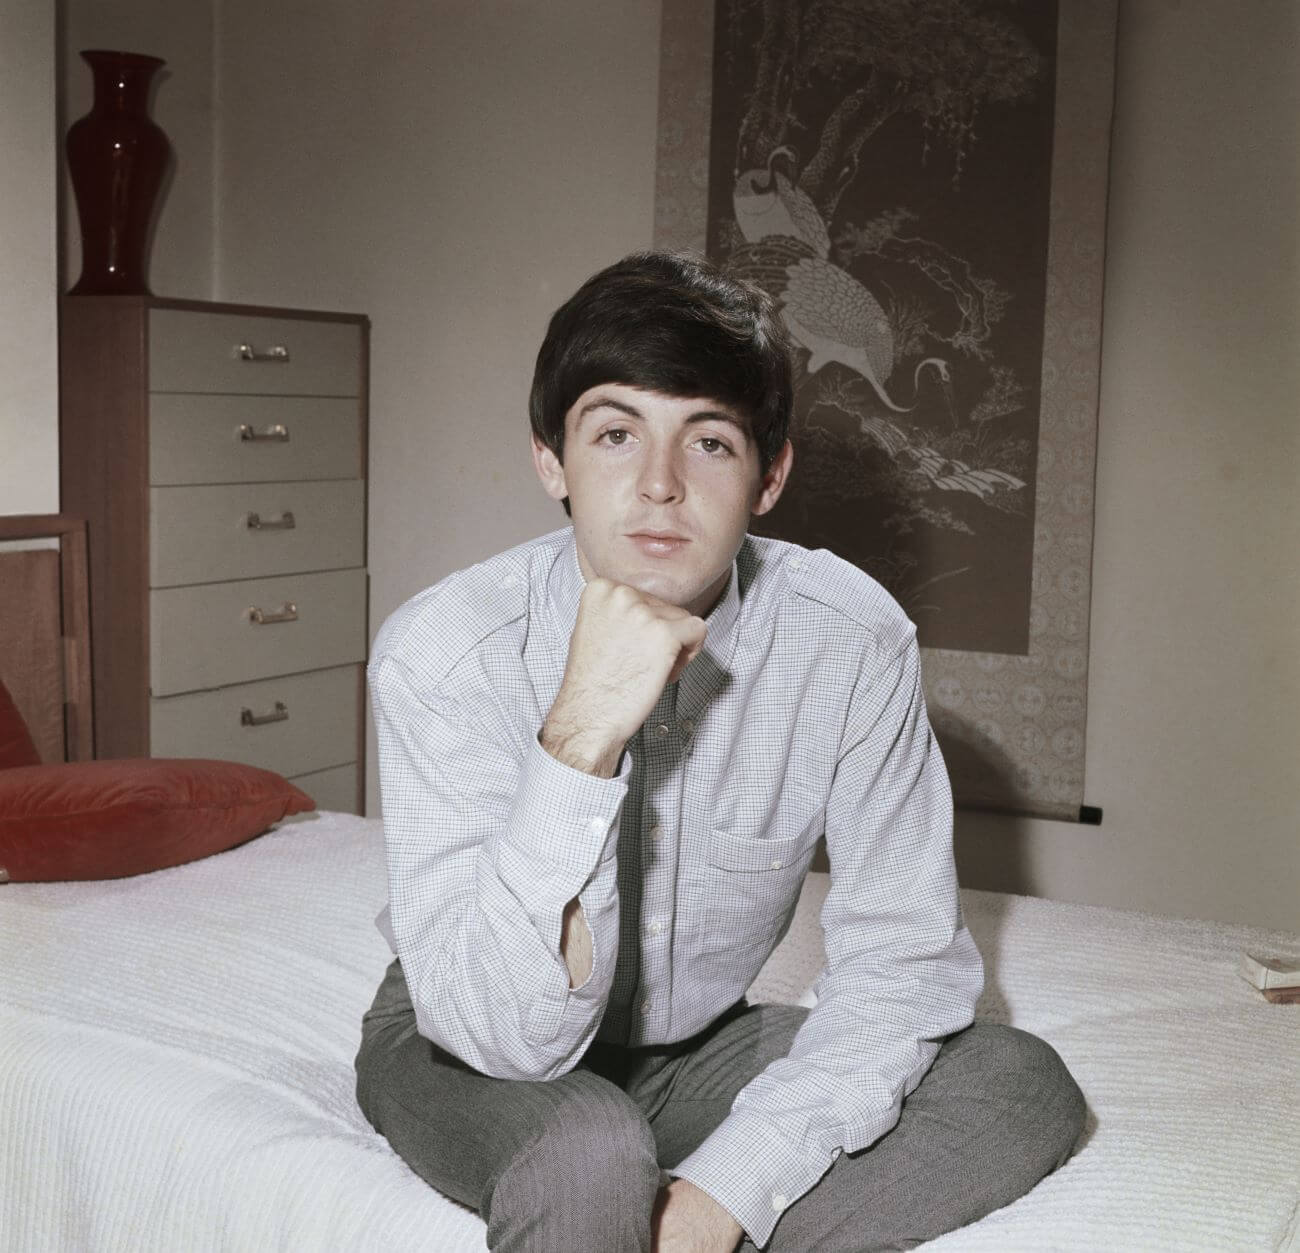 Paul McCartney sits on a bed and rests his head on his fist.